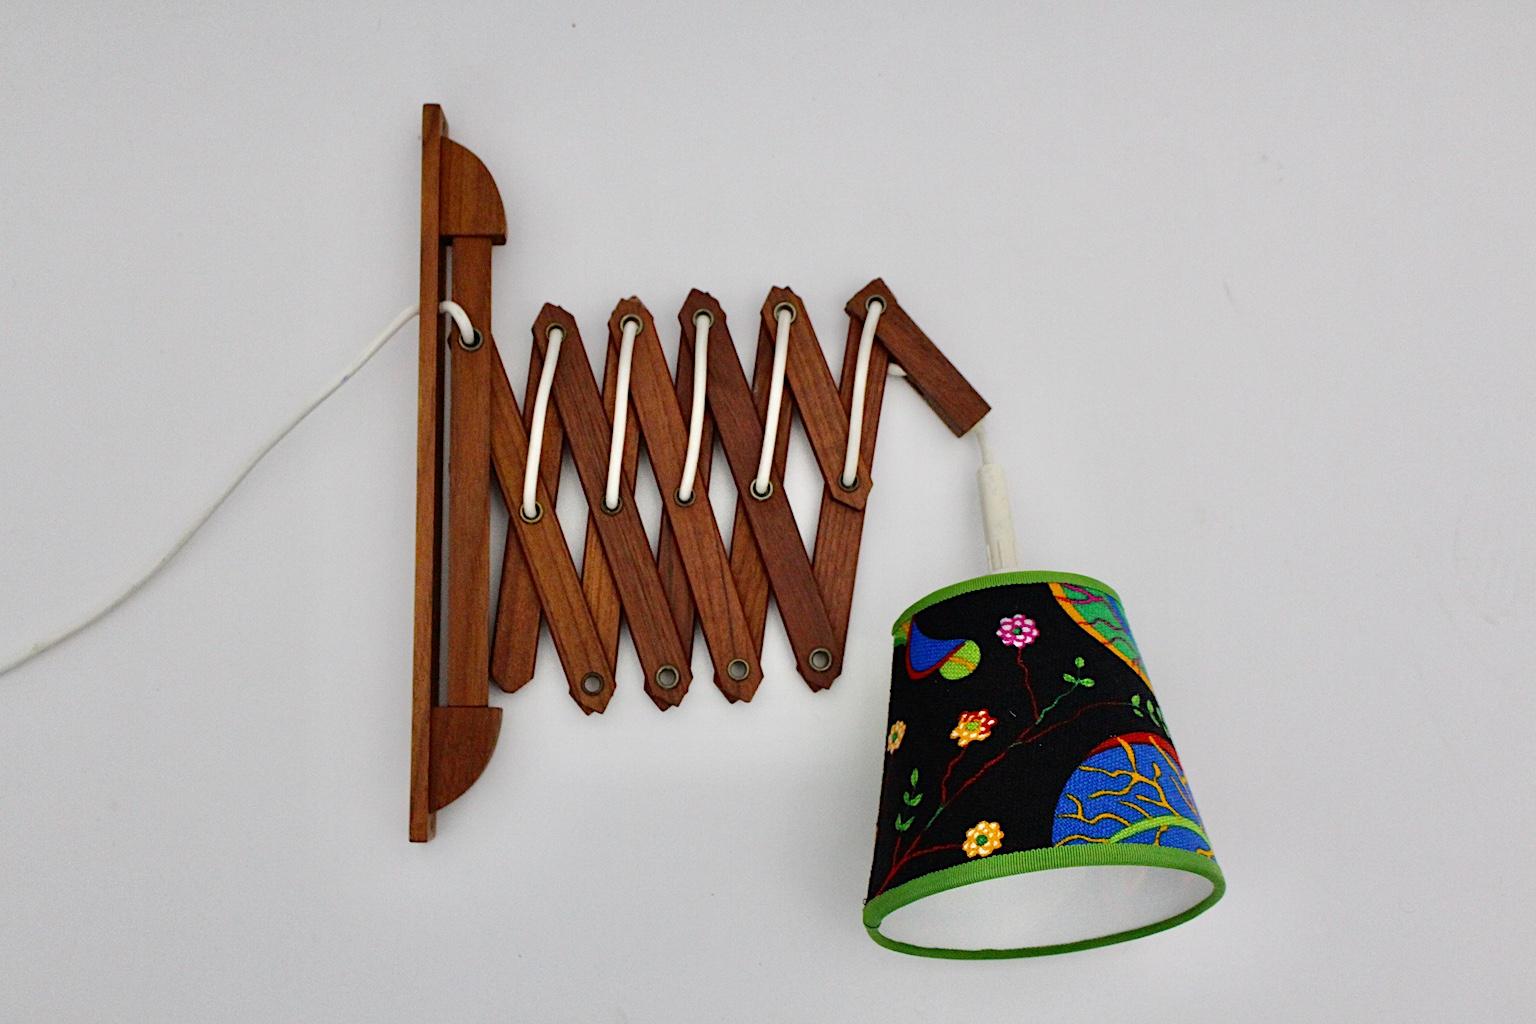 A amazing Scandinavian Modern vintage scissor lamp or wall light, which was made out of solid teakwood. The depth is adjustable from 31 cm to 93 cm.
Also the renewed lamp shade is covered with multicolored Josef Frank original design textile fabric